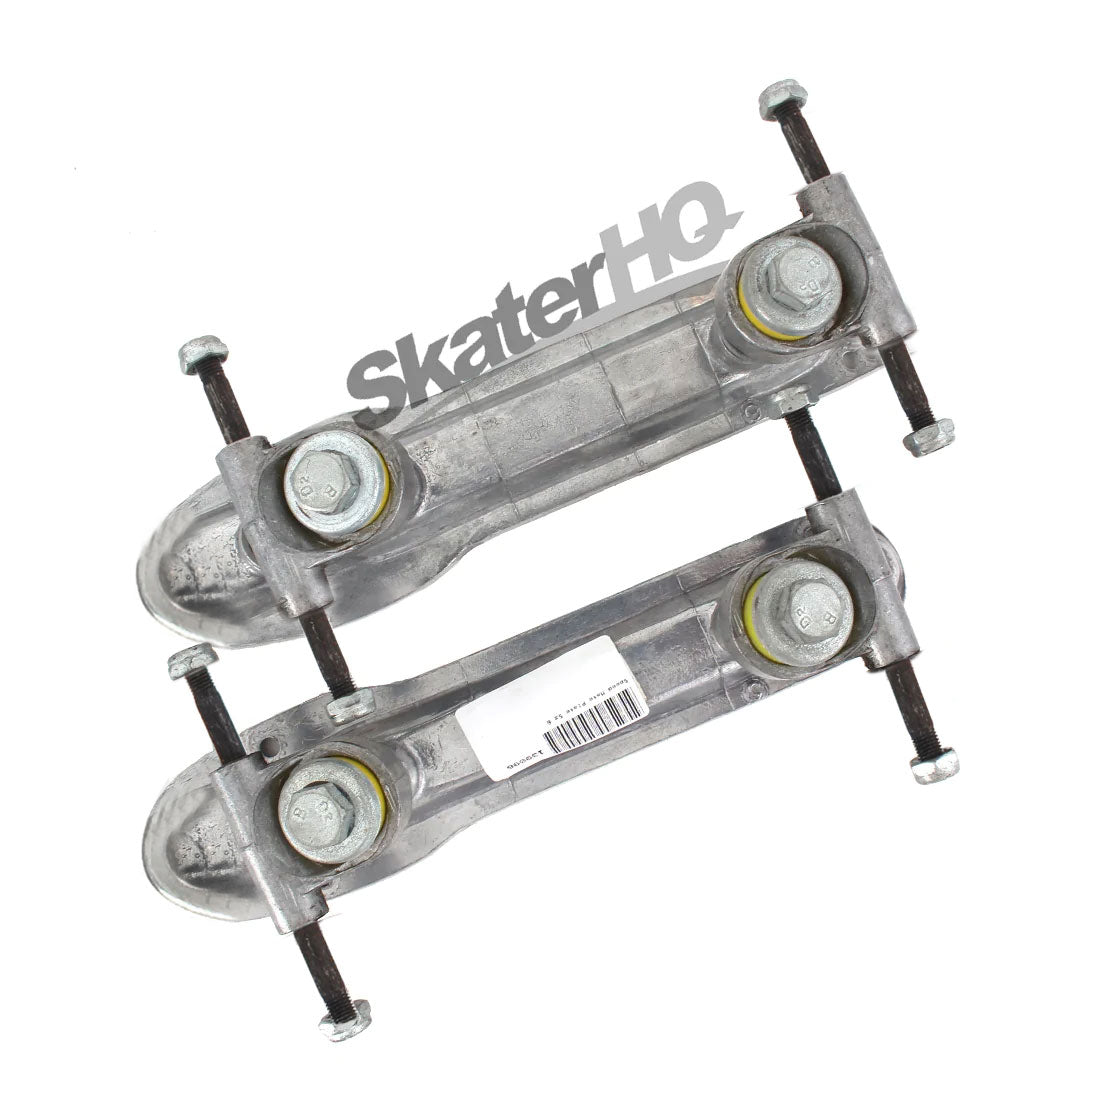 Speed Mate Plates - Size 8 Roller Skate Plates